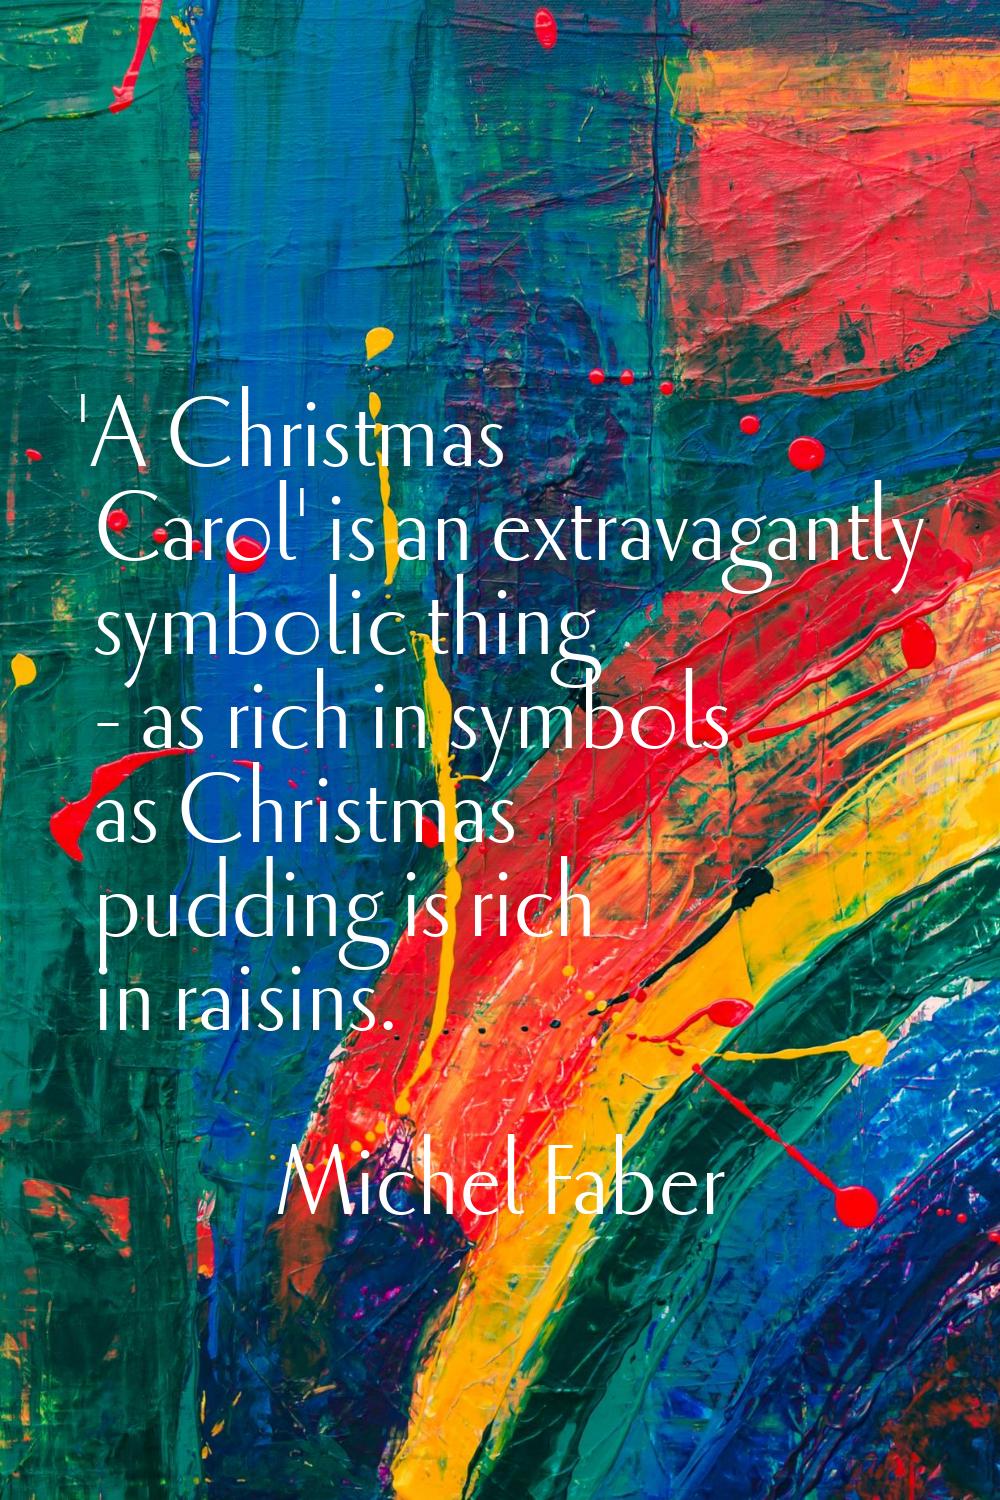 'A Christmas Carol' is an extravagantly symbolic thing - as rich in symbols as Christmas pudding is